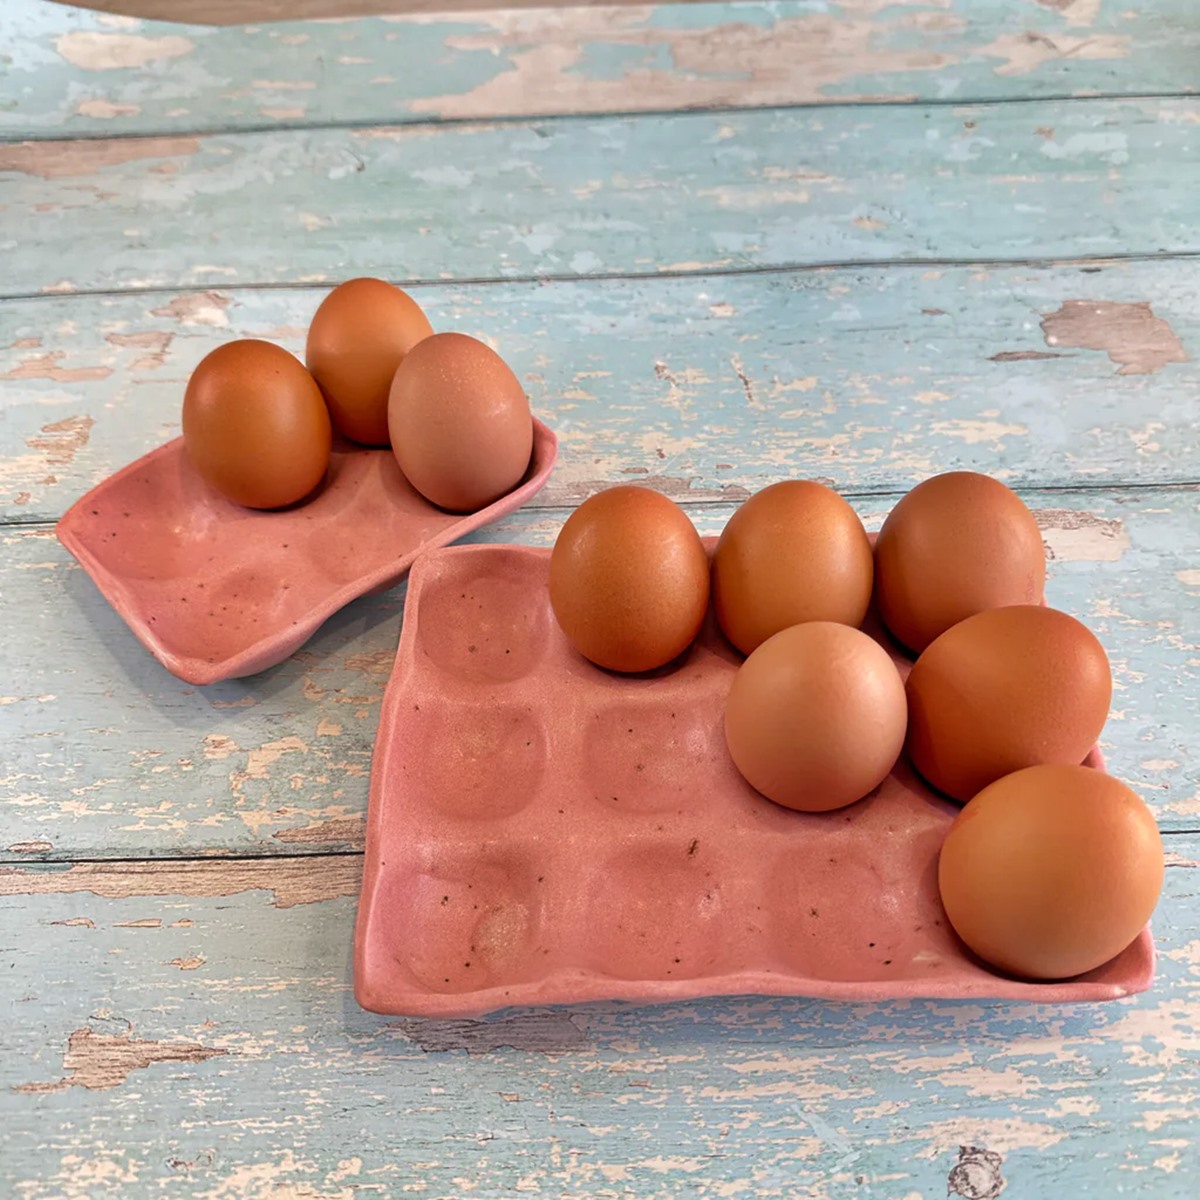 How To Make An Egg Tray